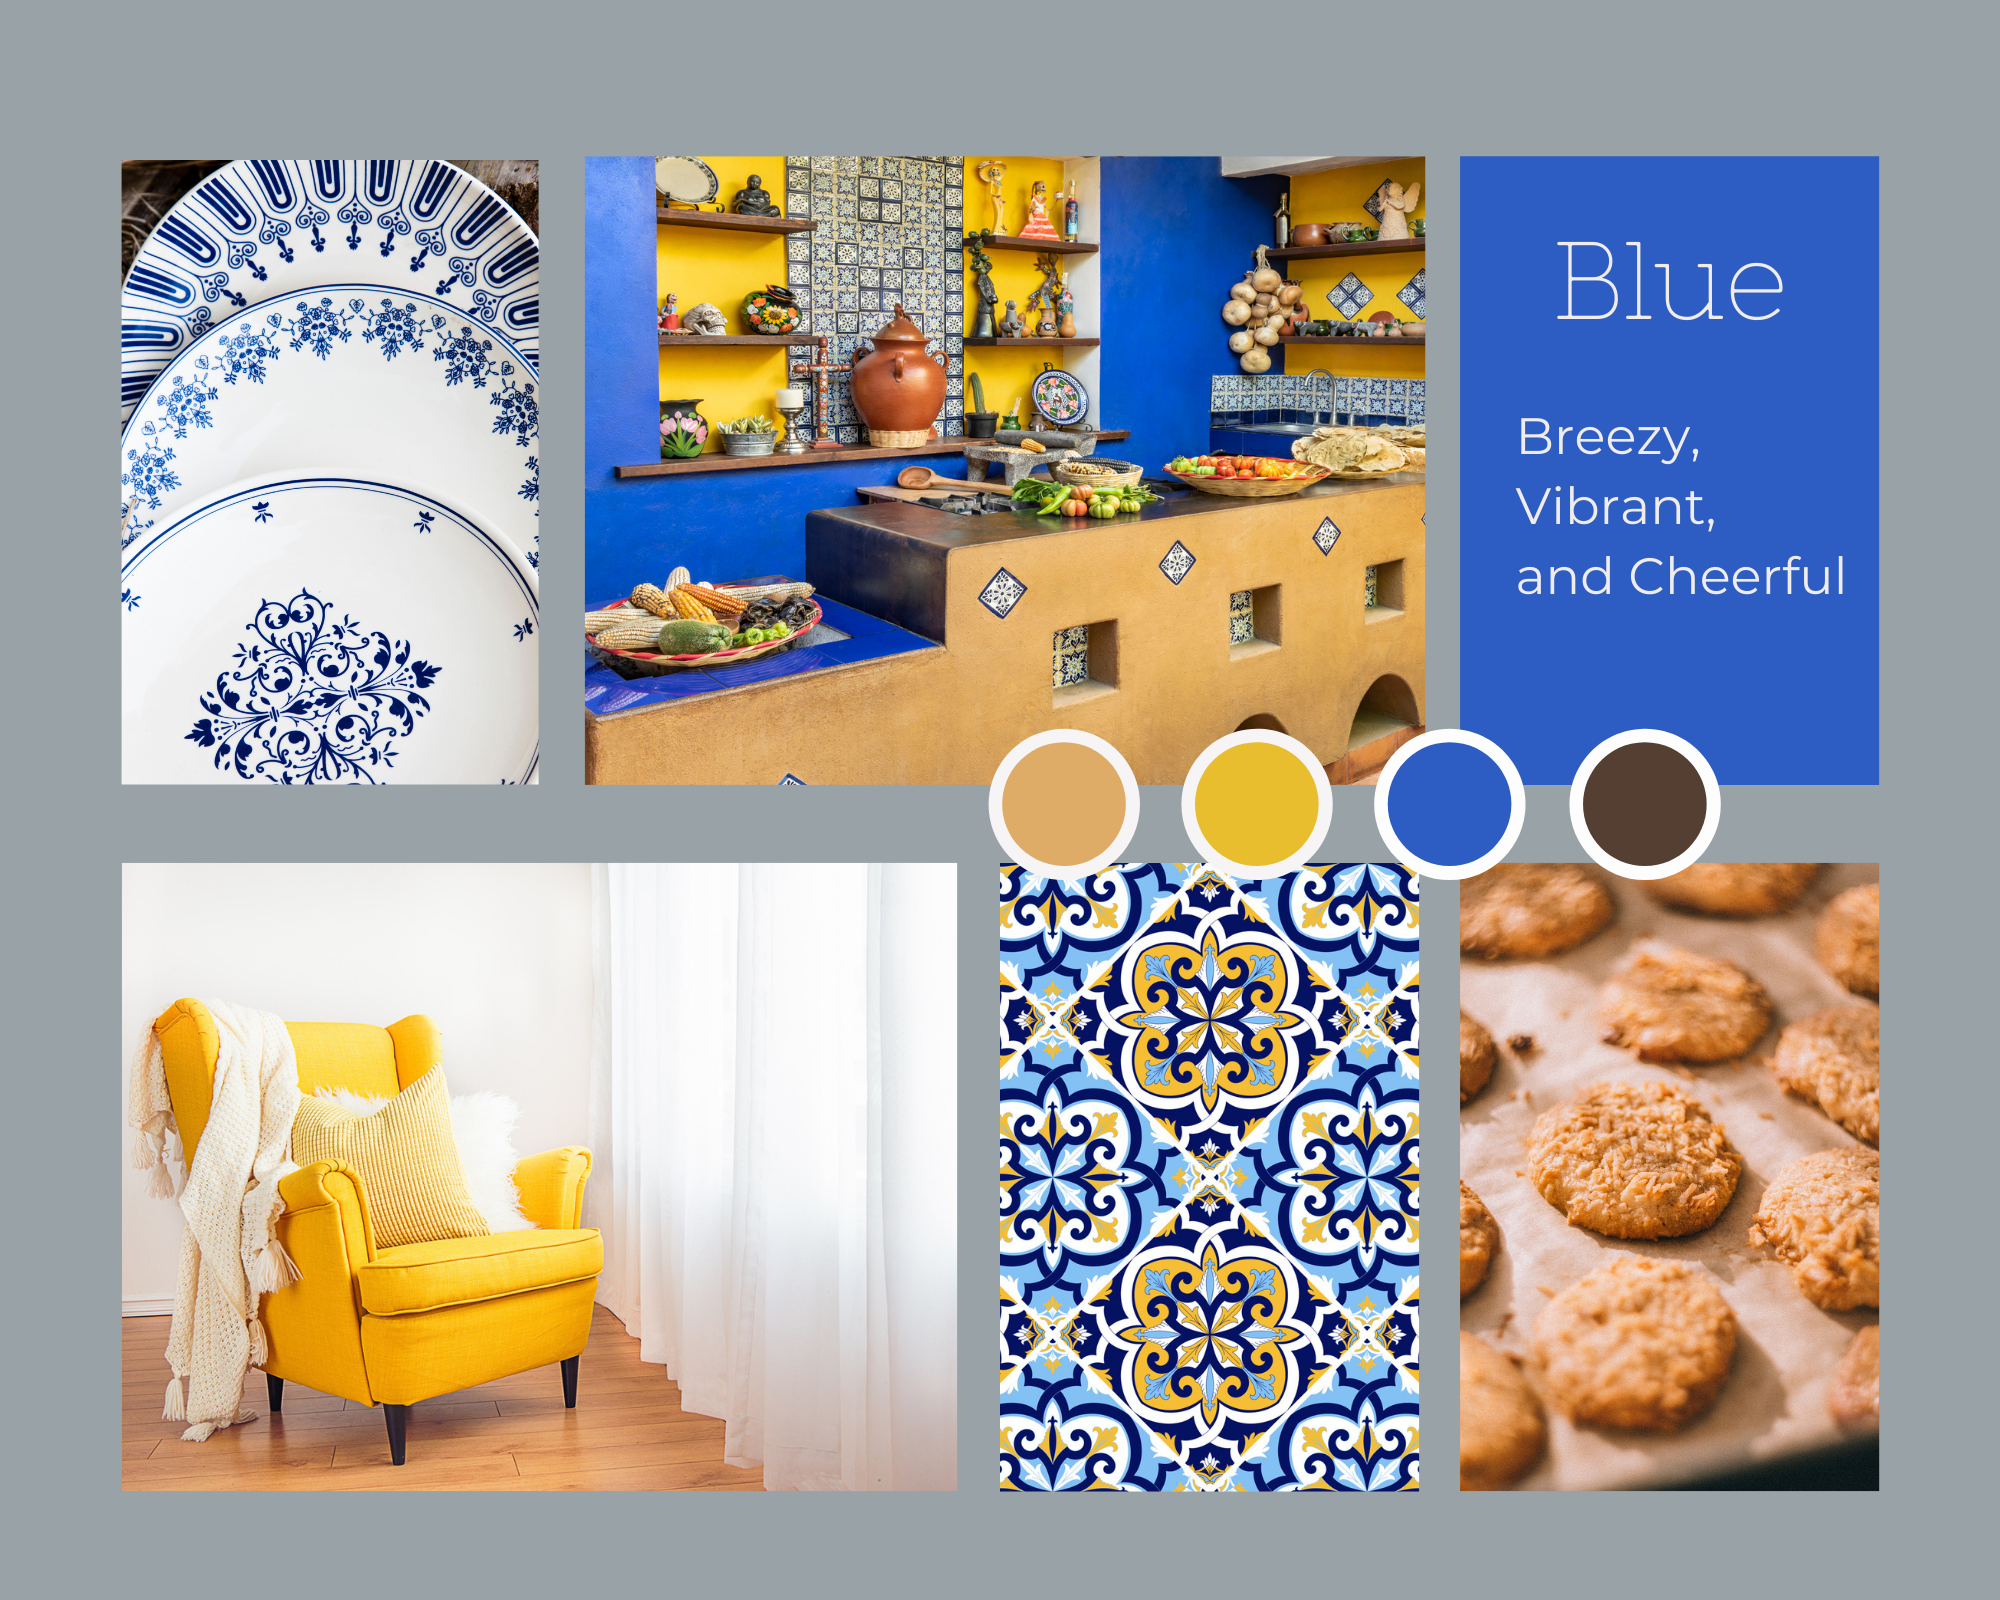 Blue – Breezy, Vibrant, and Cheerful